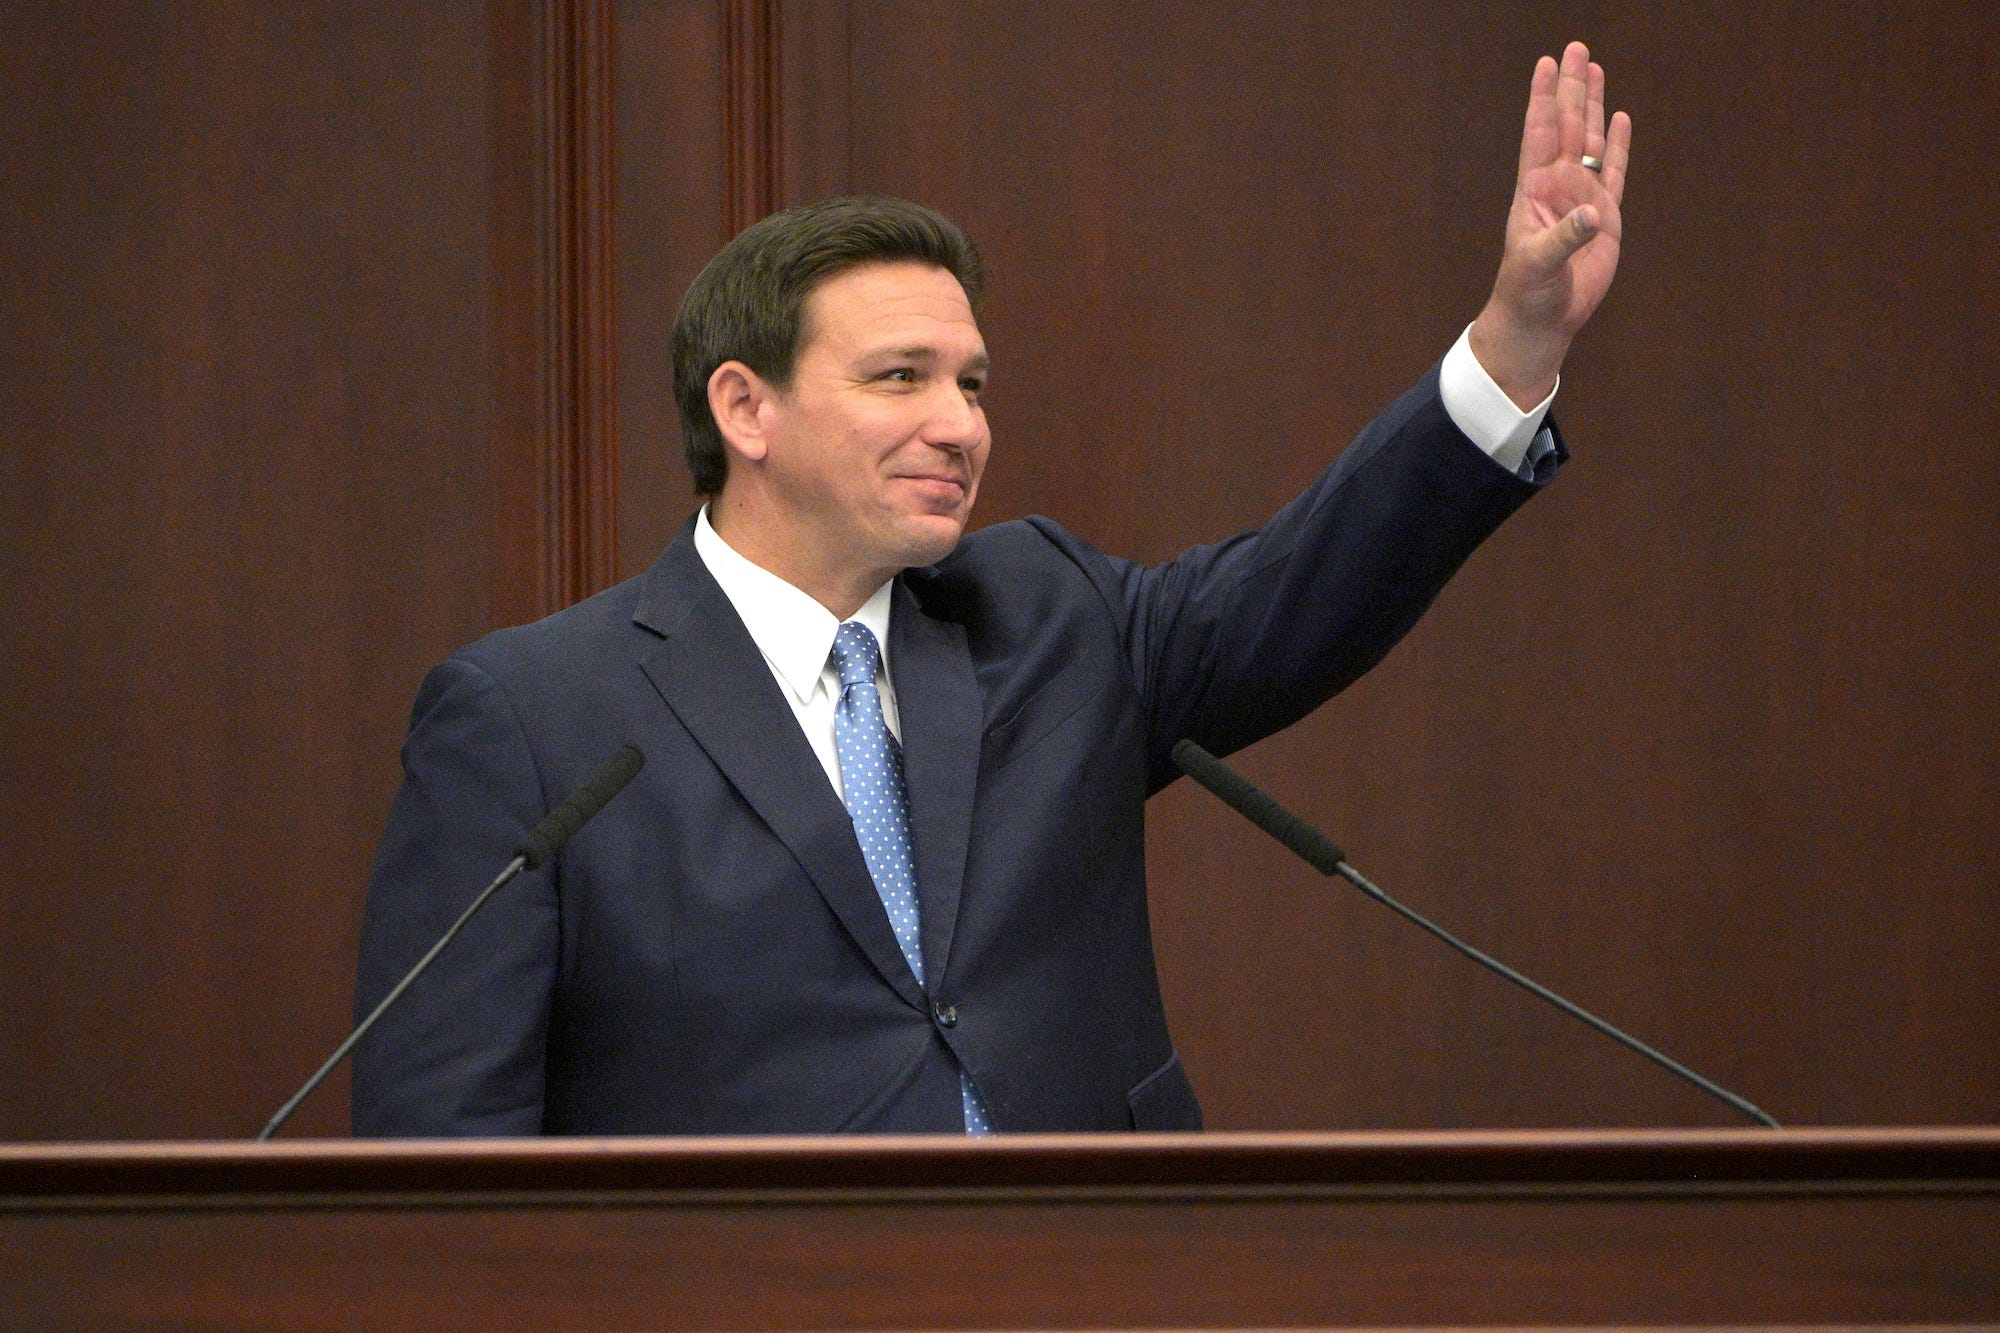 Gov. Ron DeSantis gestures during his annual address to state lawmakers in the Florida capitol of Tallahassee.